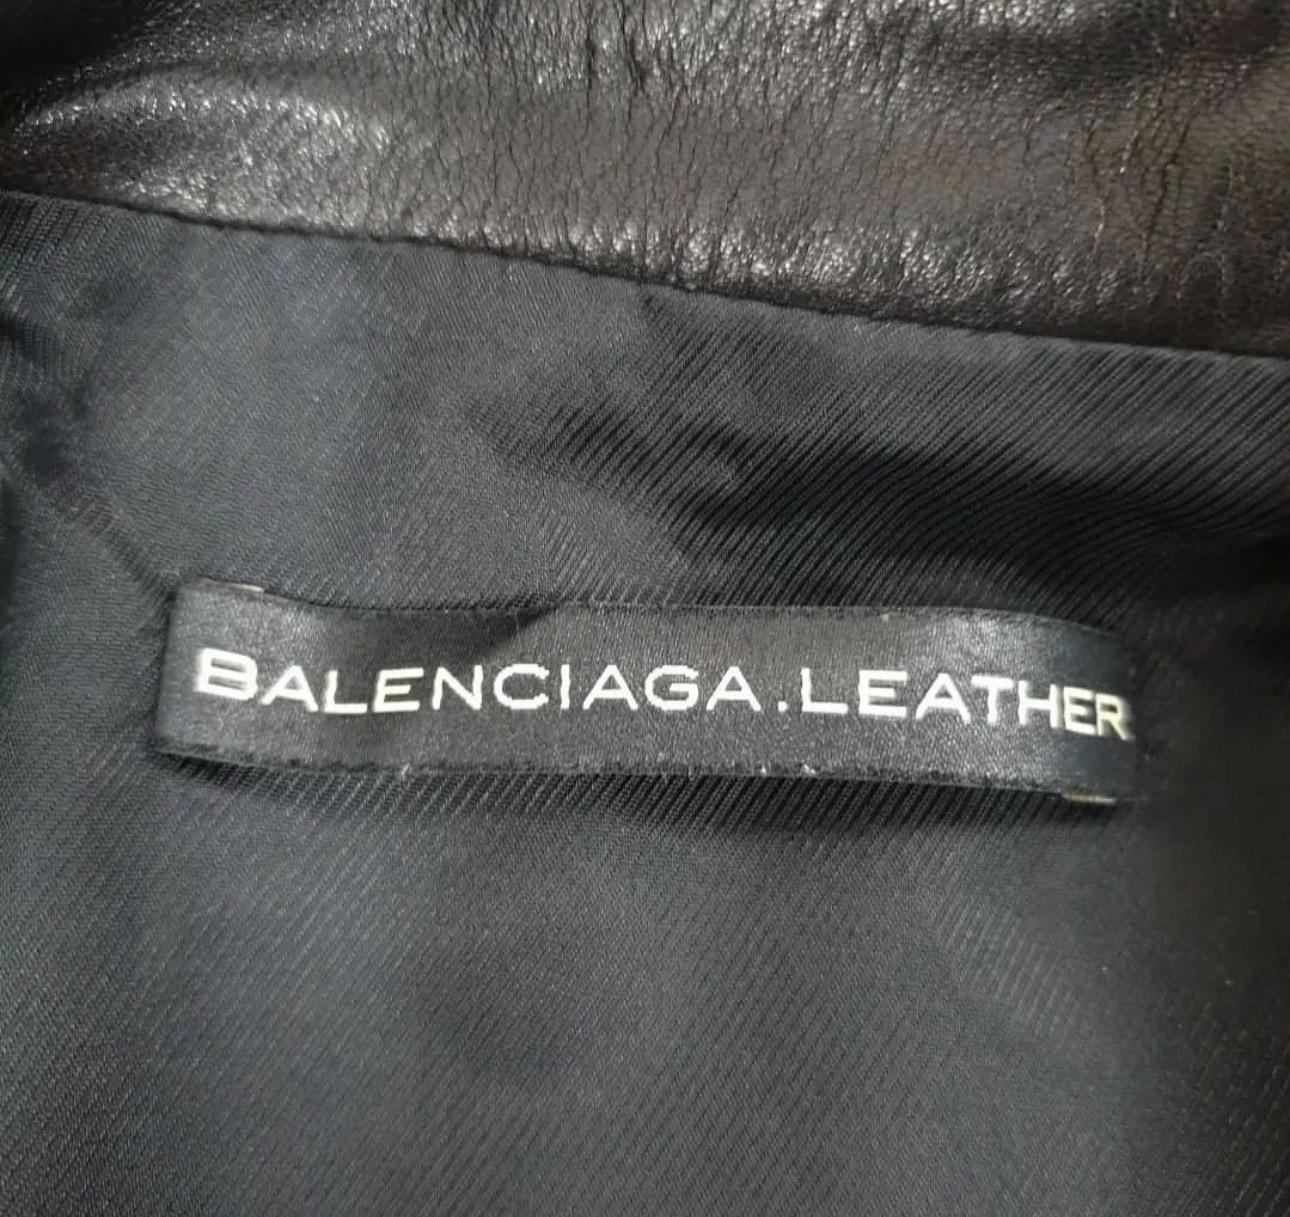 Balenciaga Black Leather Moto Jacket In Good Condition For Sale In Krakow, PL